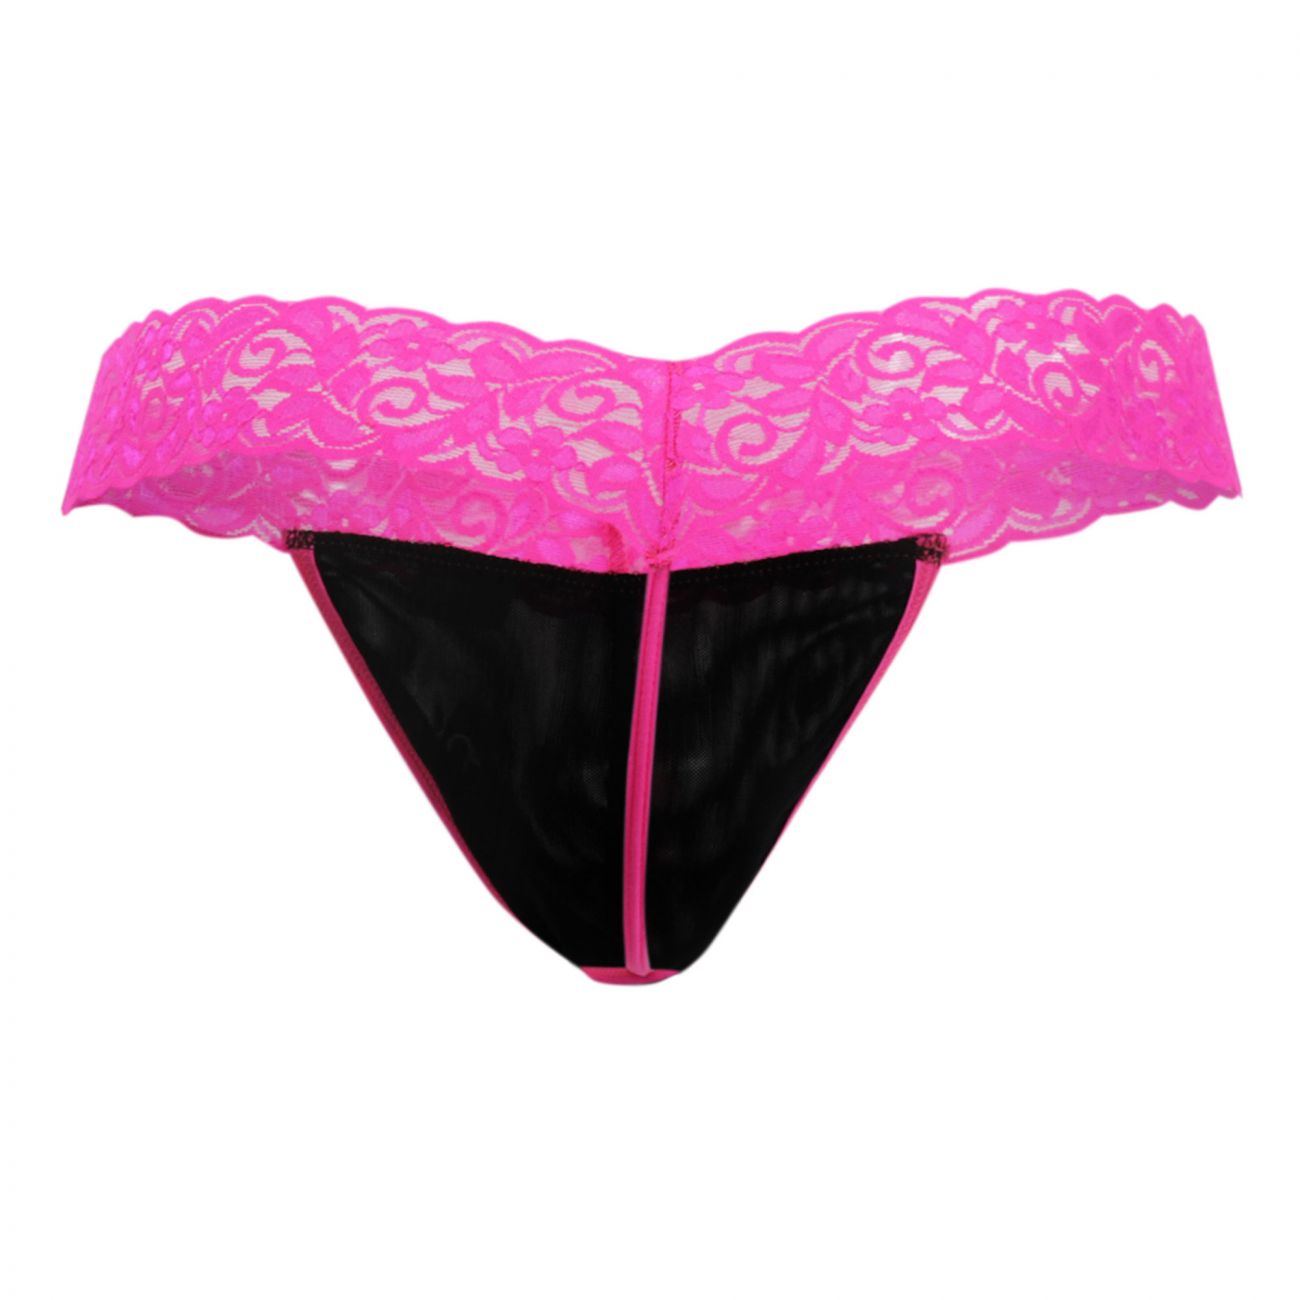 CandyMan 99370X Alluring Thongs Hot Pink Plus Sizes